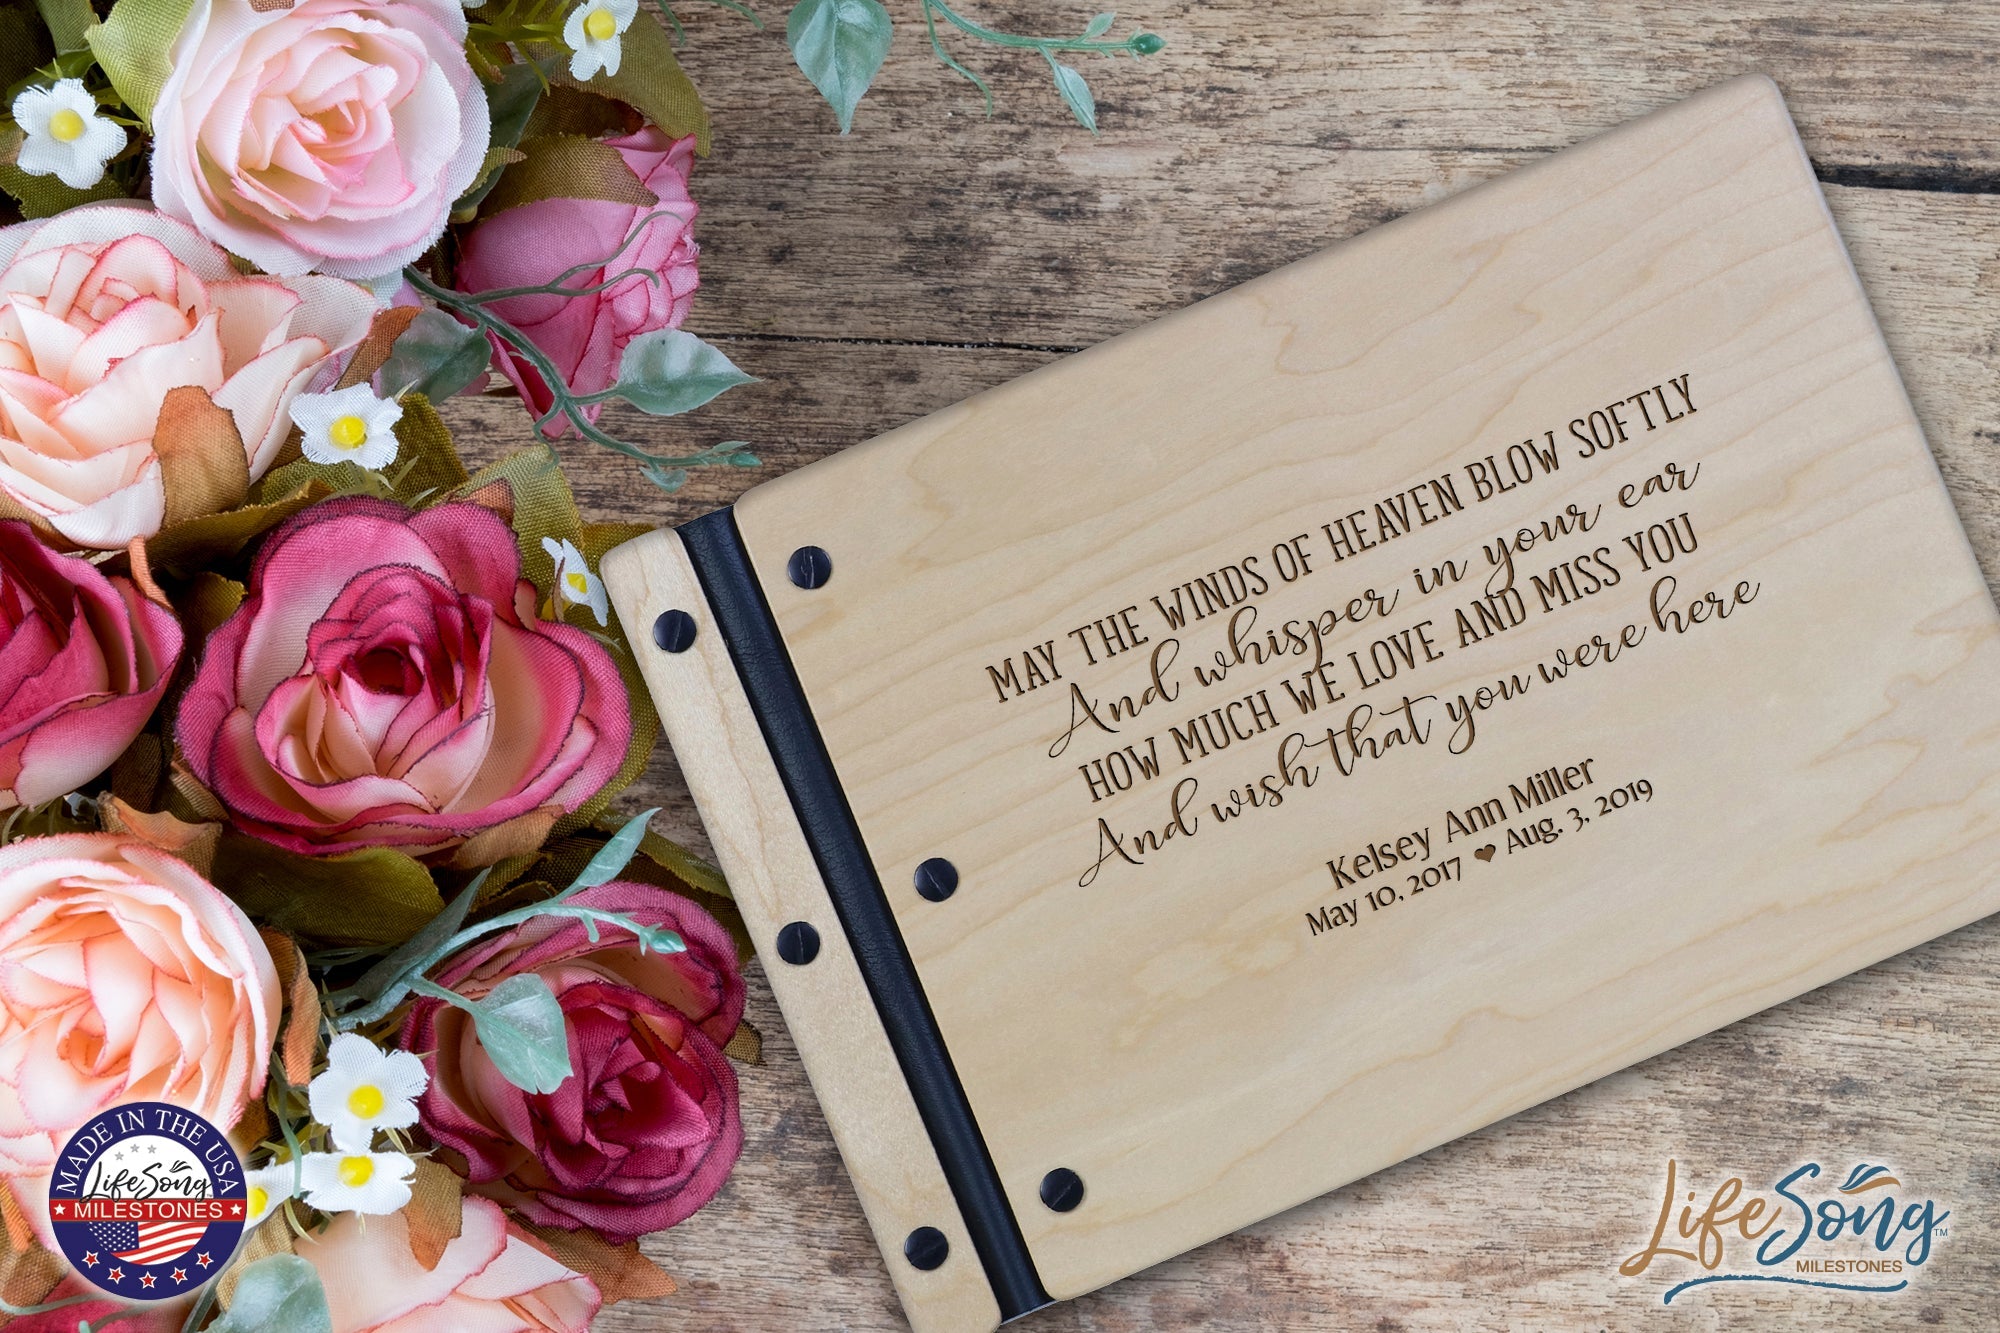 Personalized Memorial Guest Book - Winds Of Heaven - LifeSong Milestones